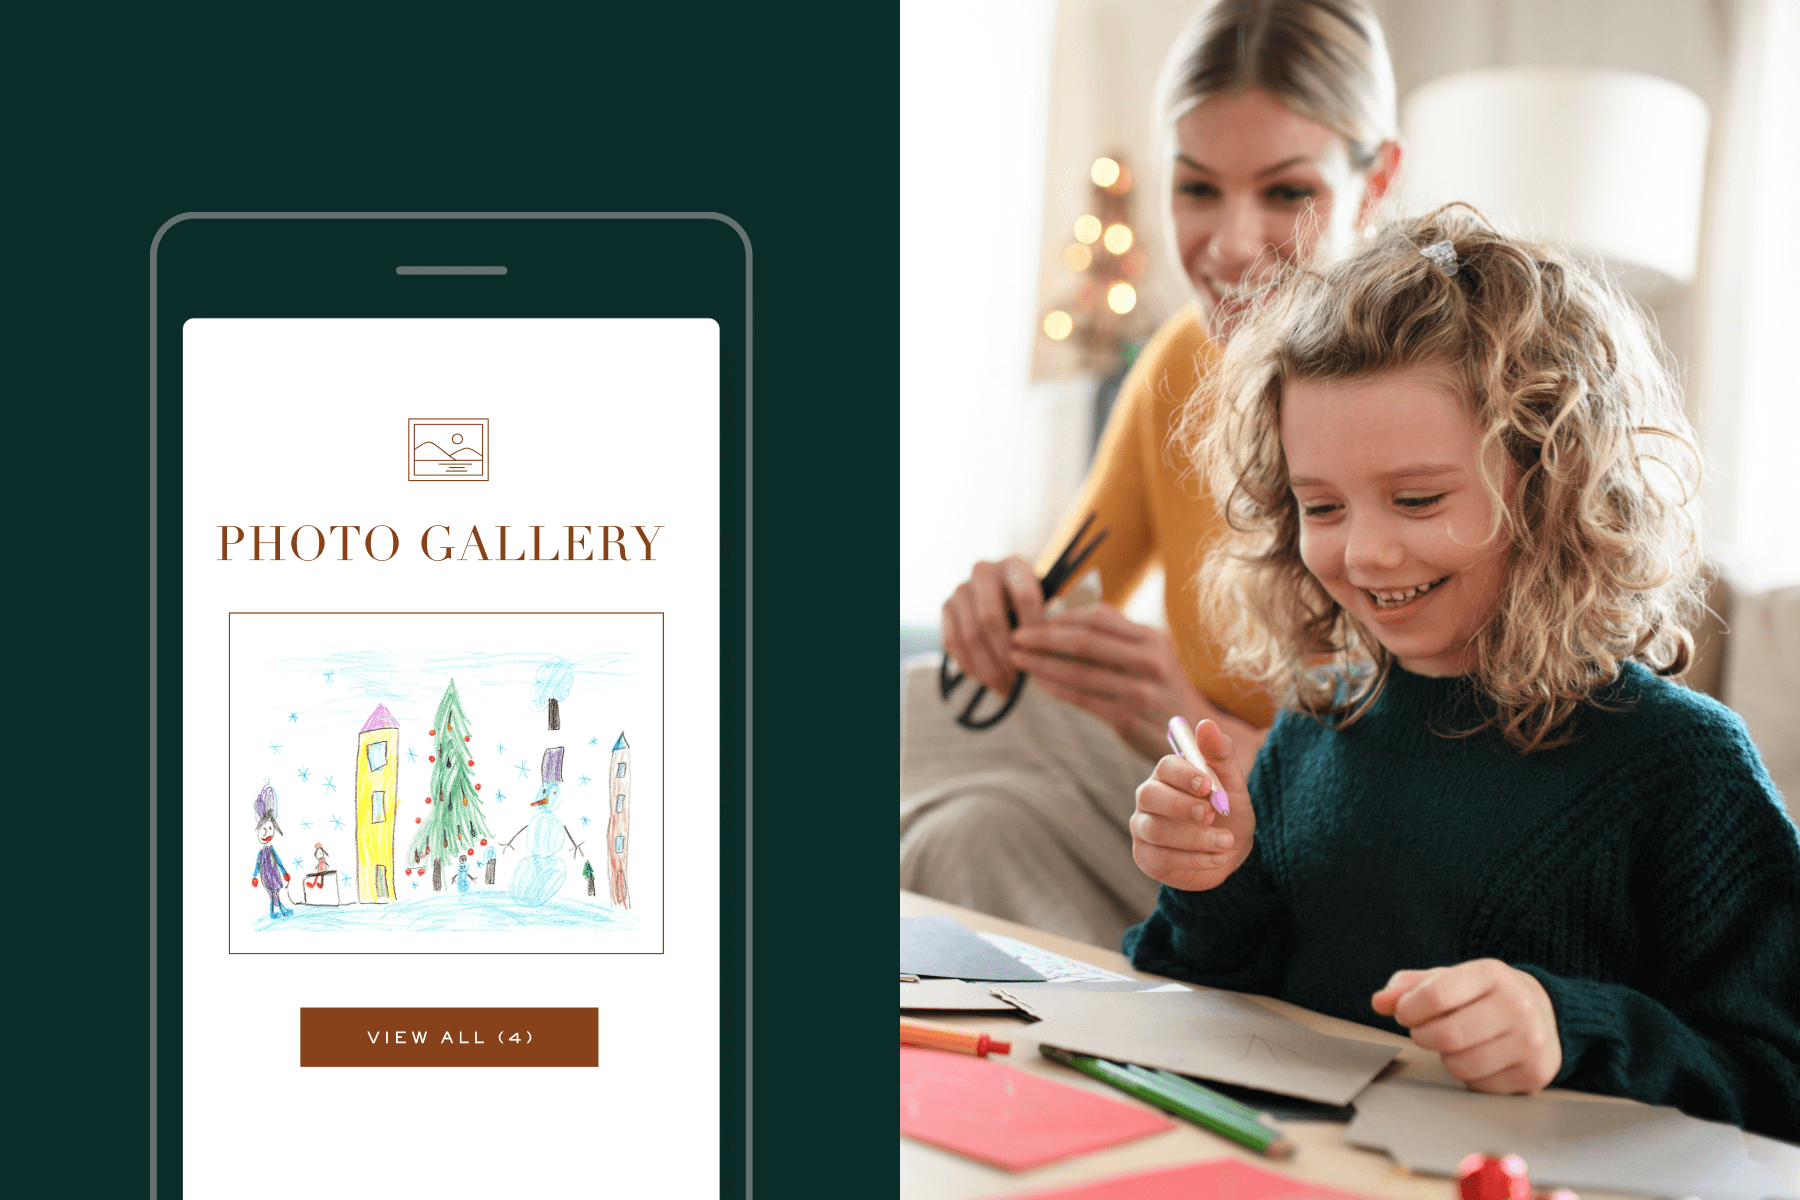 A Photo Gallery Block on a smartphone screen shows a child’s drawing; a woman watches a young child drawing.